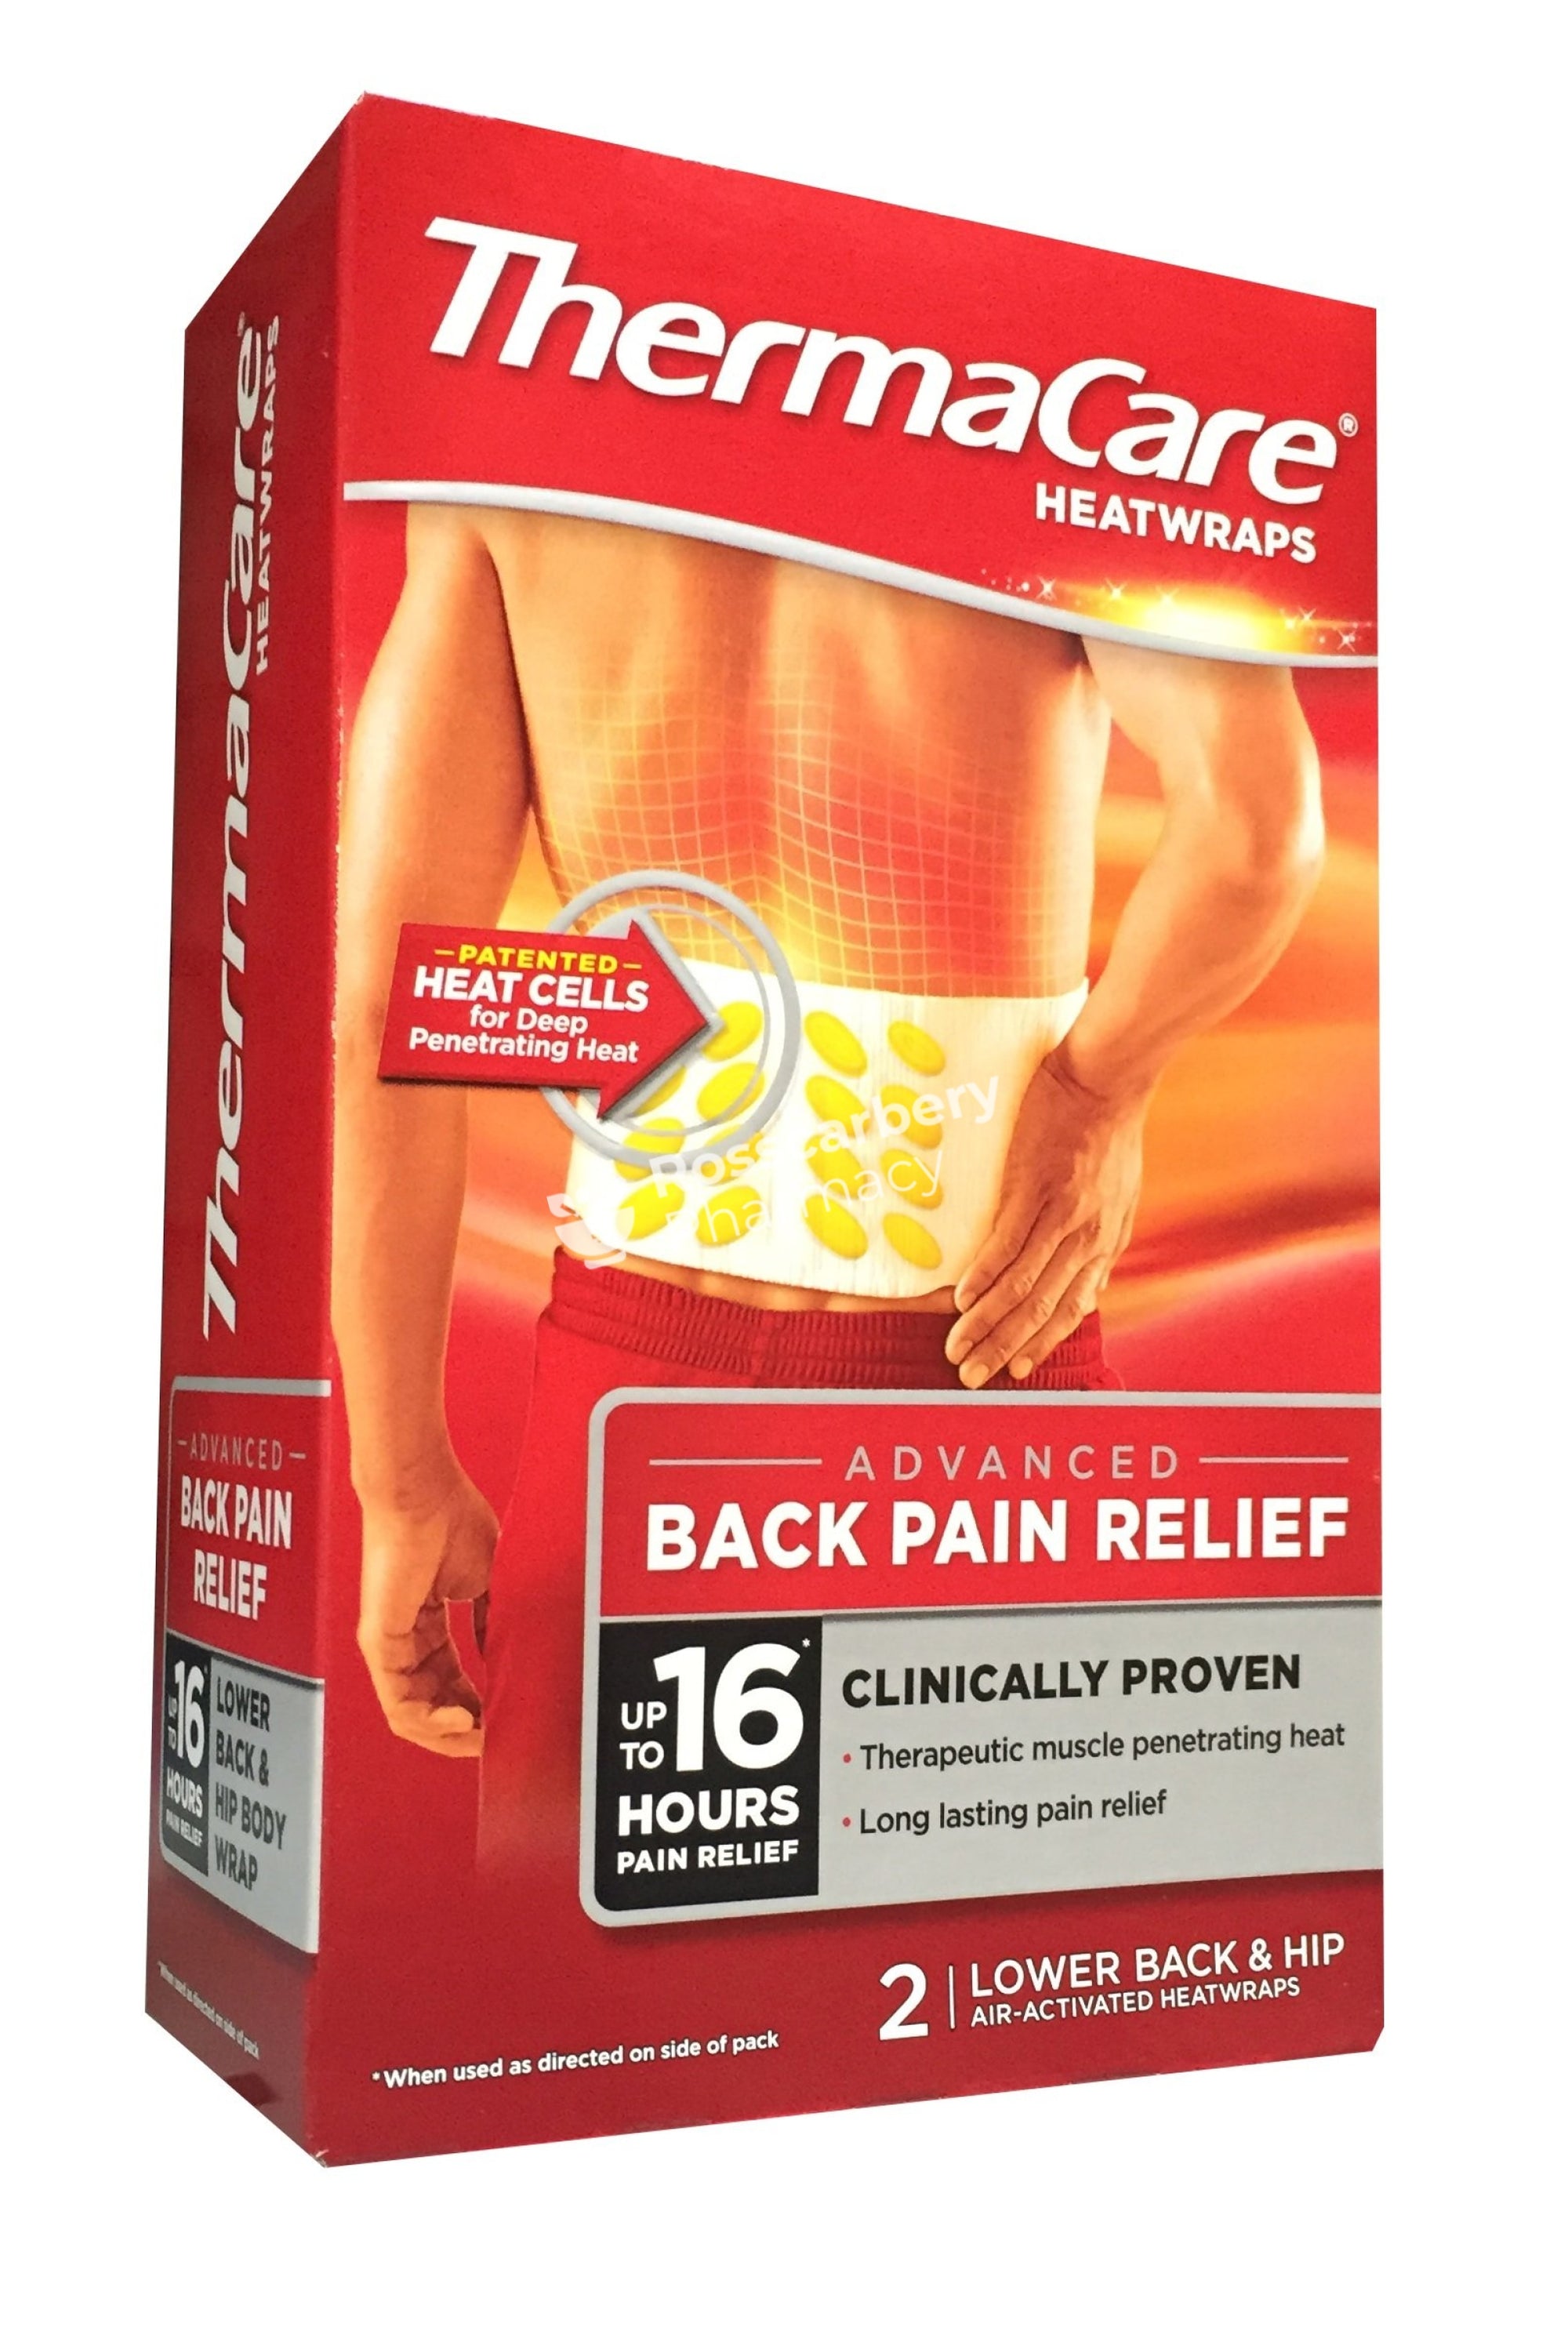 Thermacare Heatwraps Advanced Back Pain Relief - Lower & Hip Cold/heat Therapy